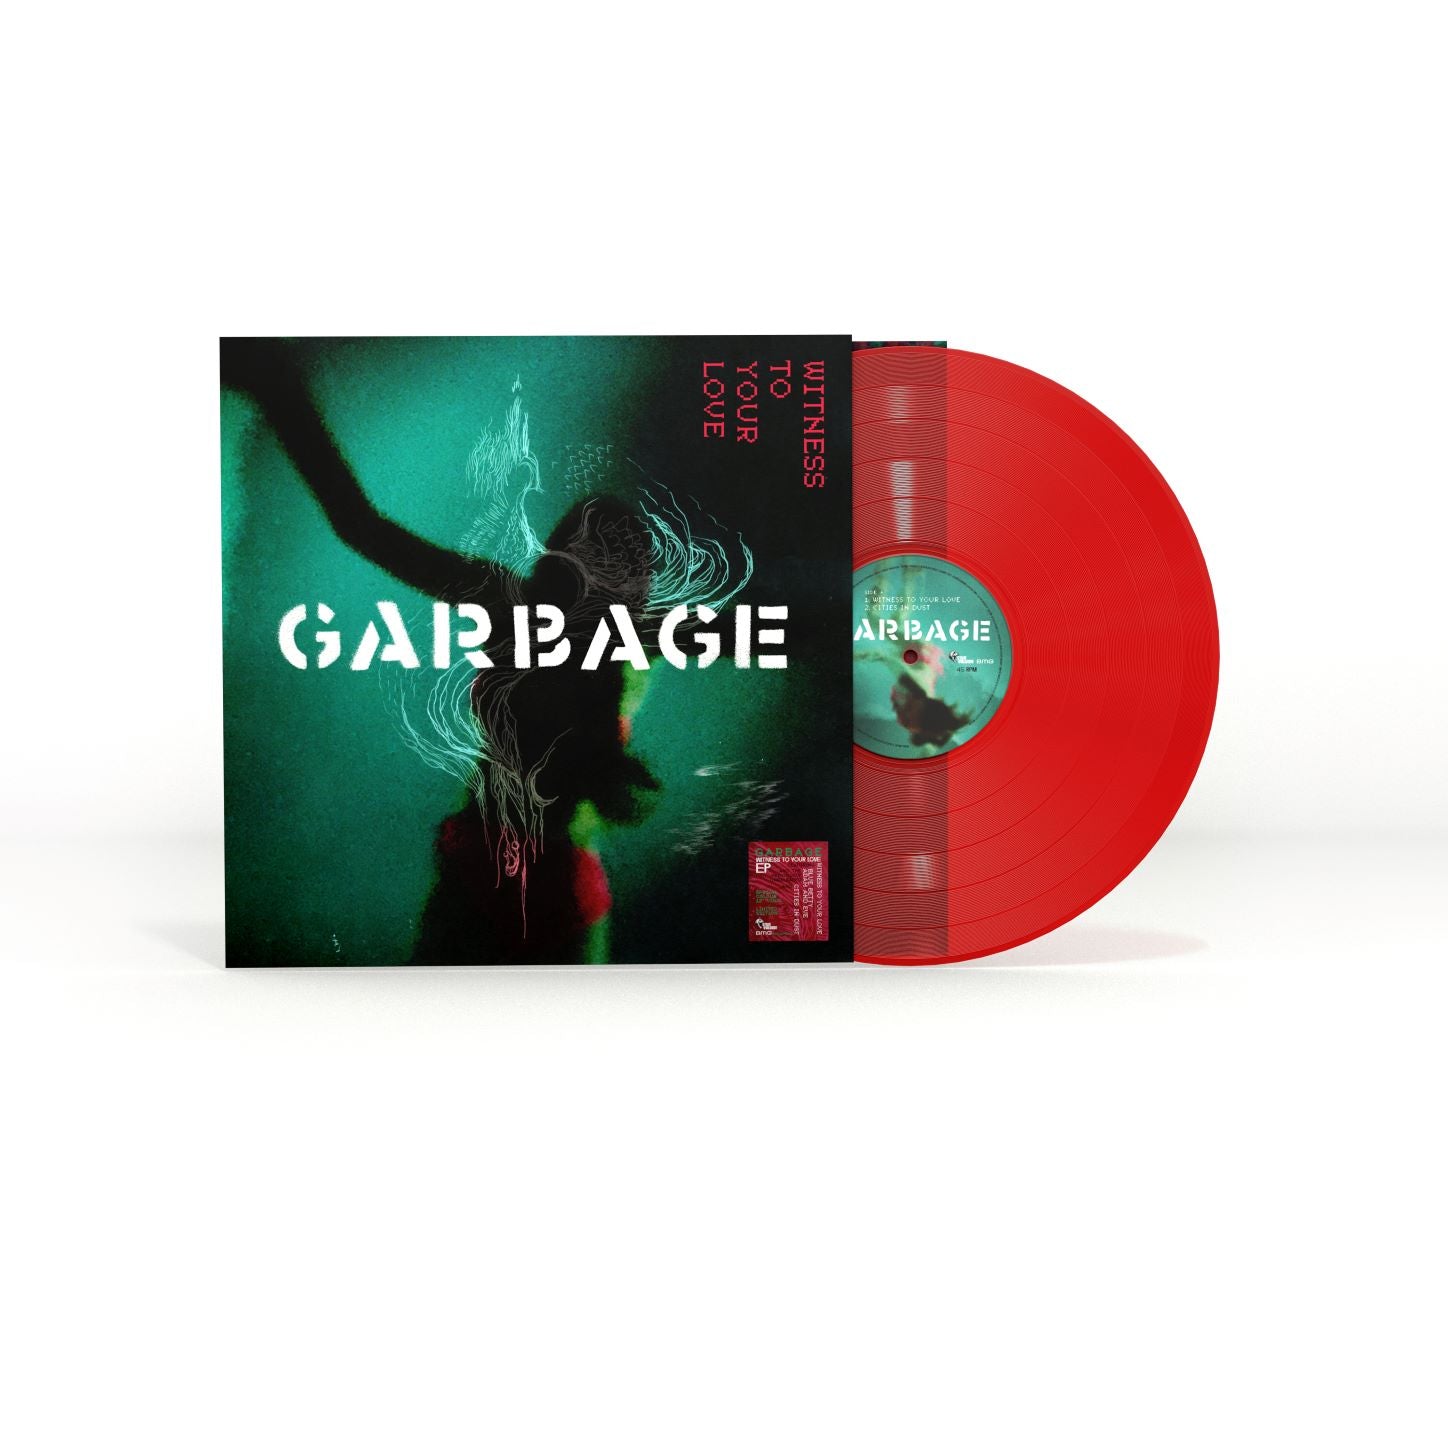 Witness To Your Love: Limited Transparent Red Vinyl 12" [RSD23]